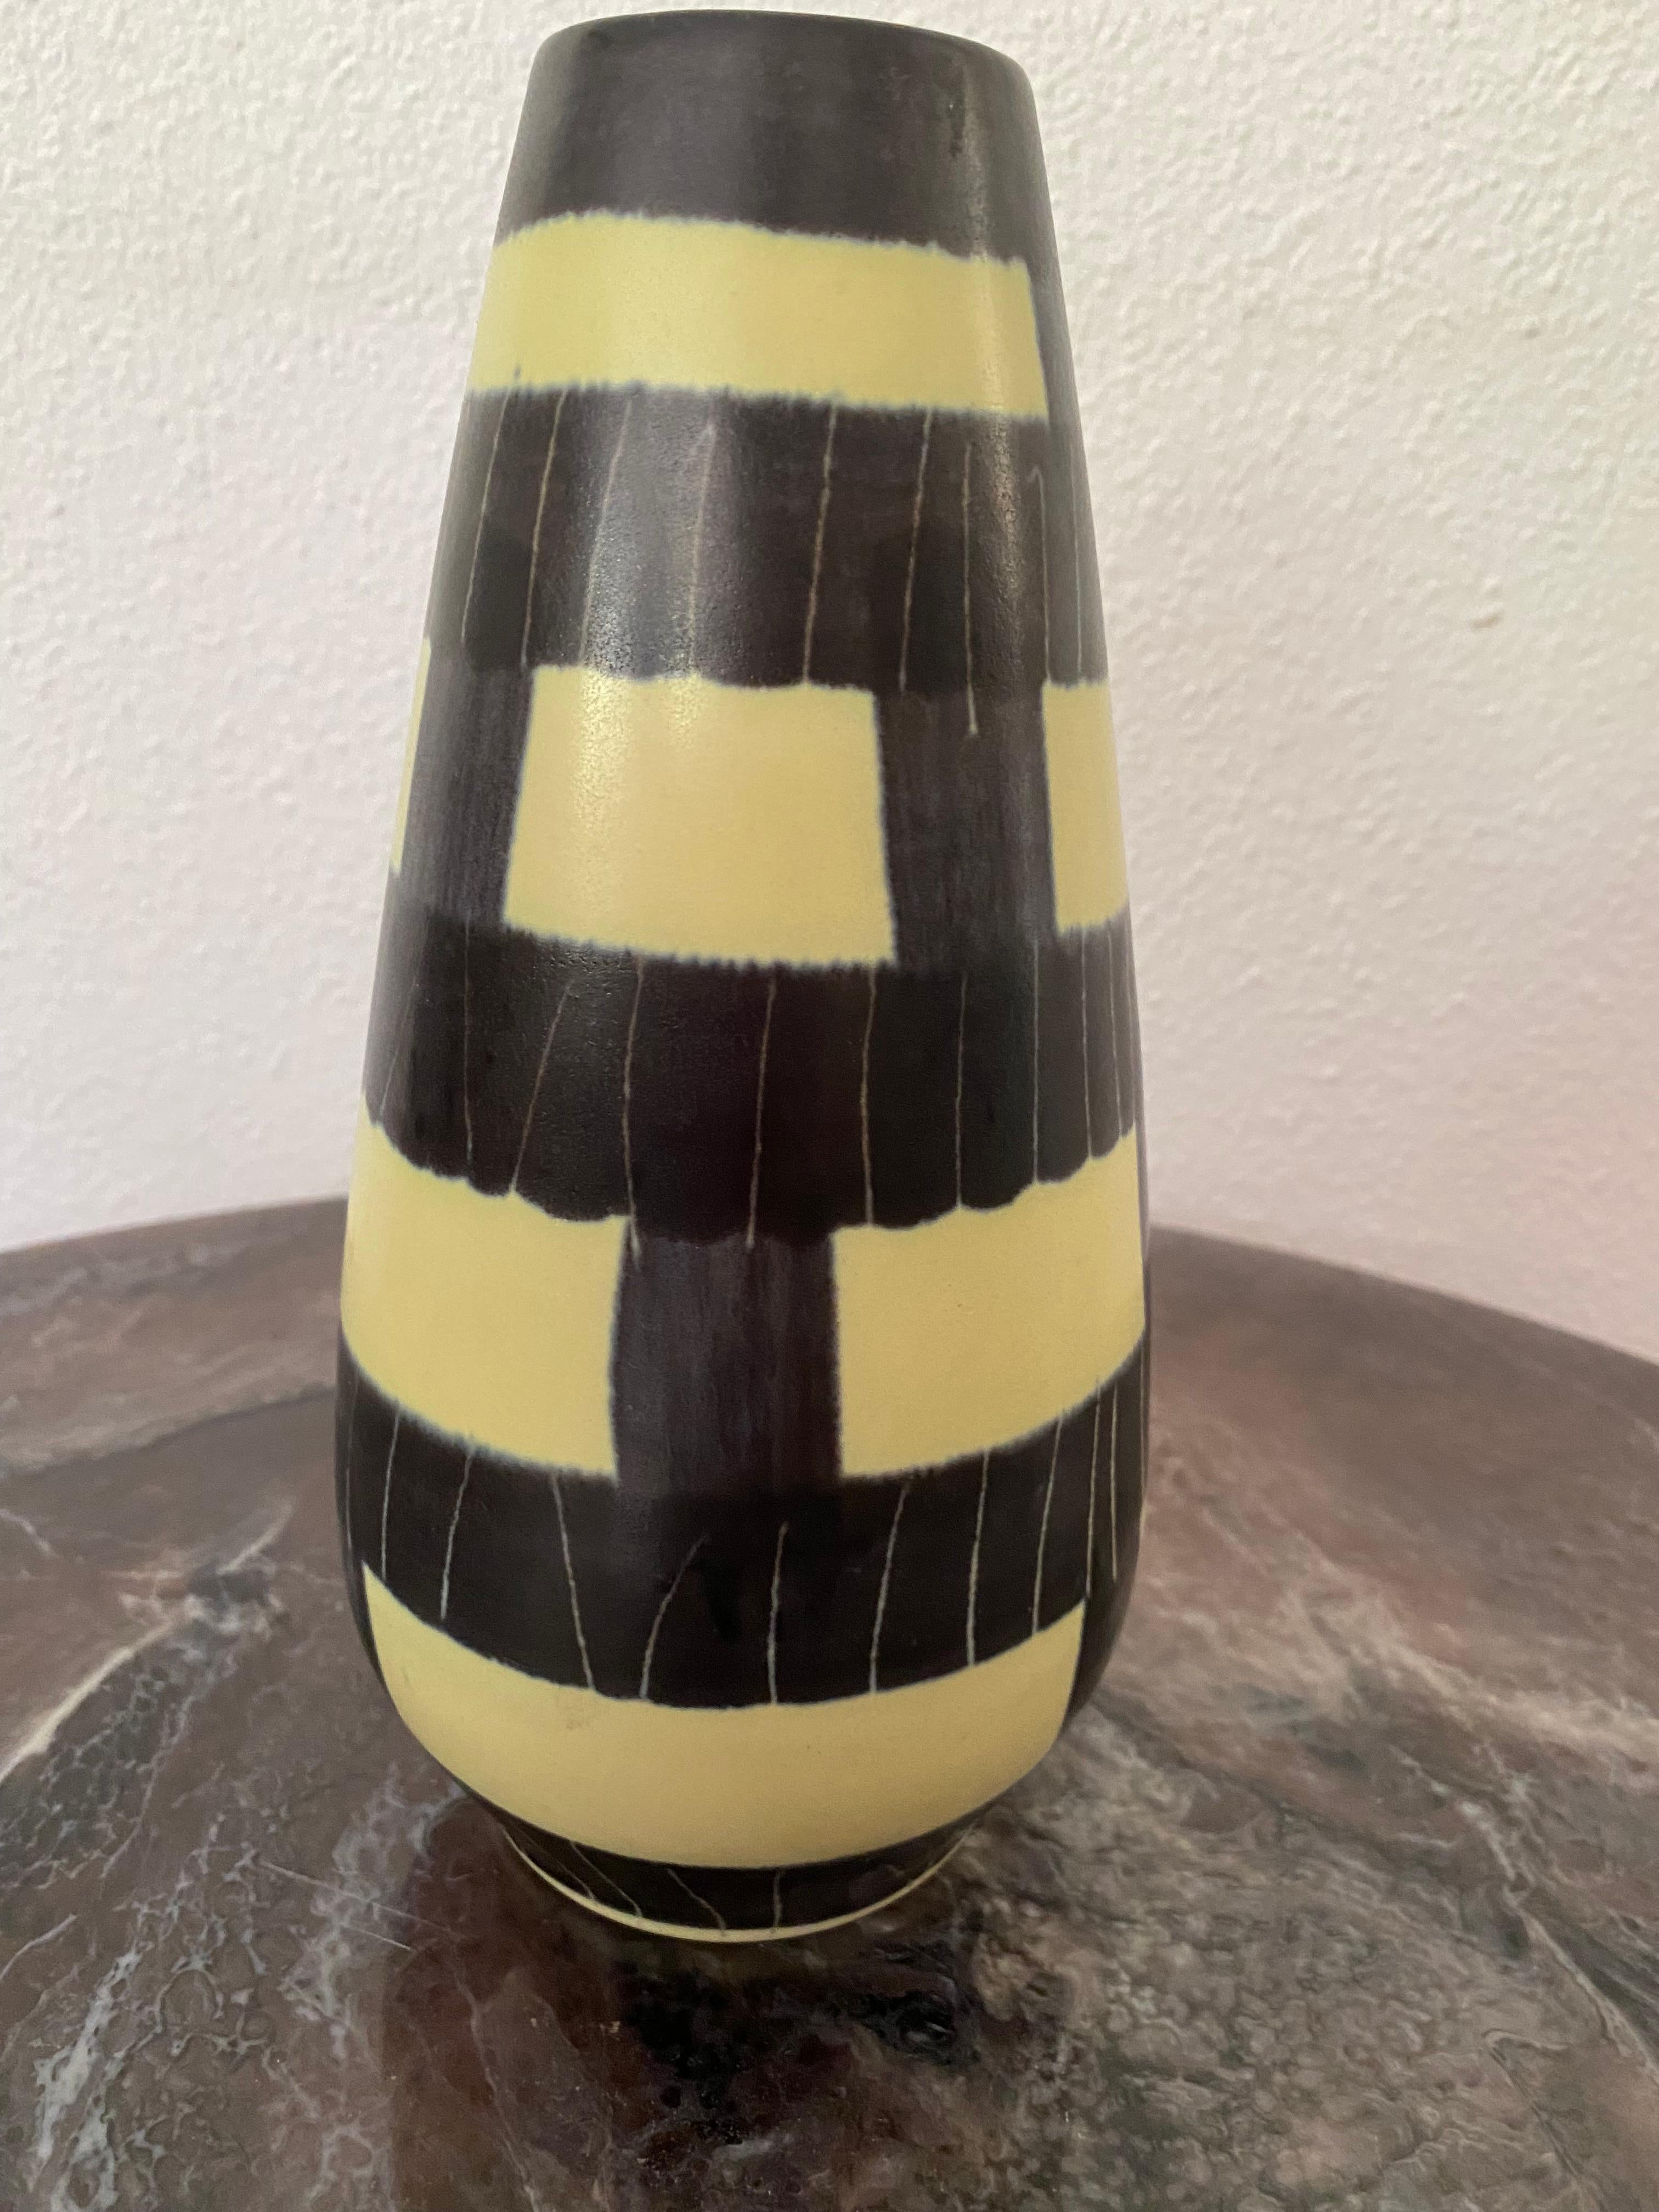 Nice colored vase from the sixties.